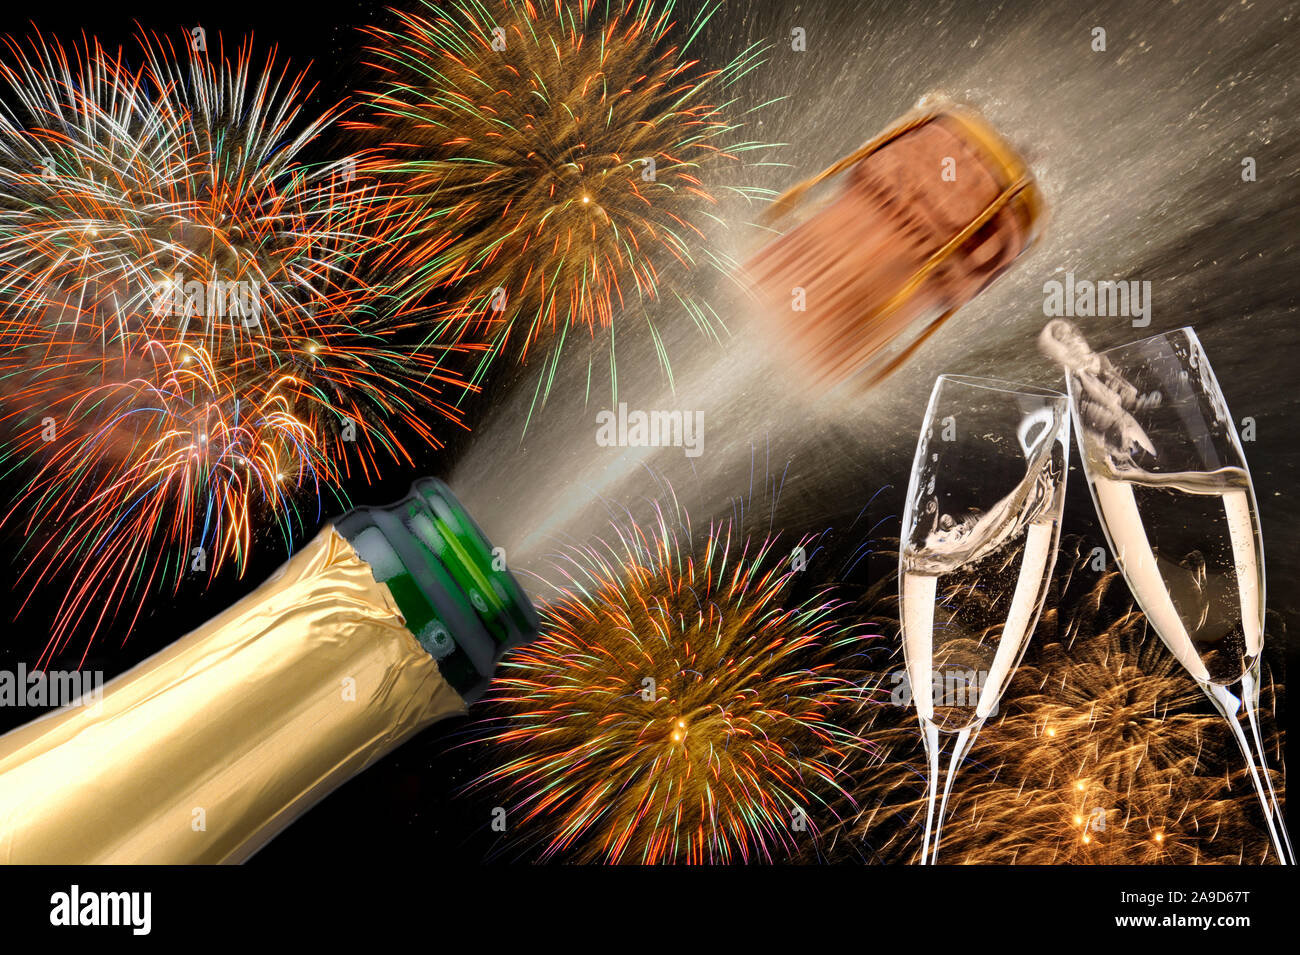 Champagne bottle with popping cork and clinking glasses, brilliant fireworks in the background, New Year 2019 Stock Photo